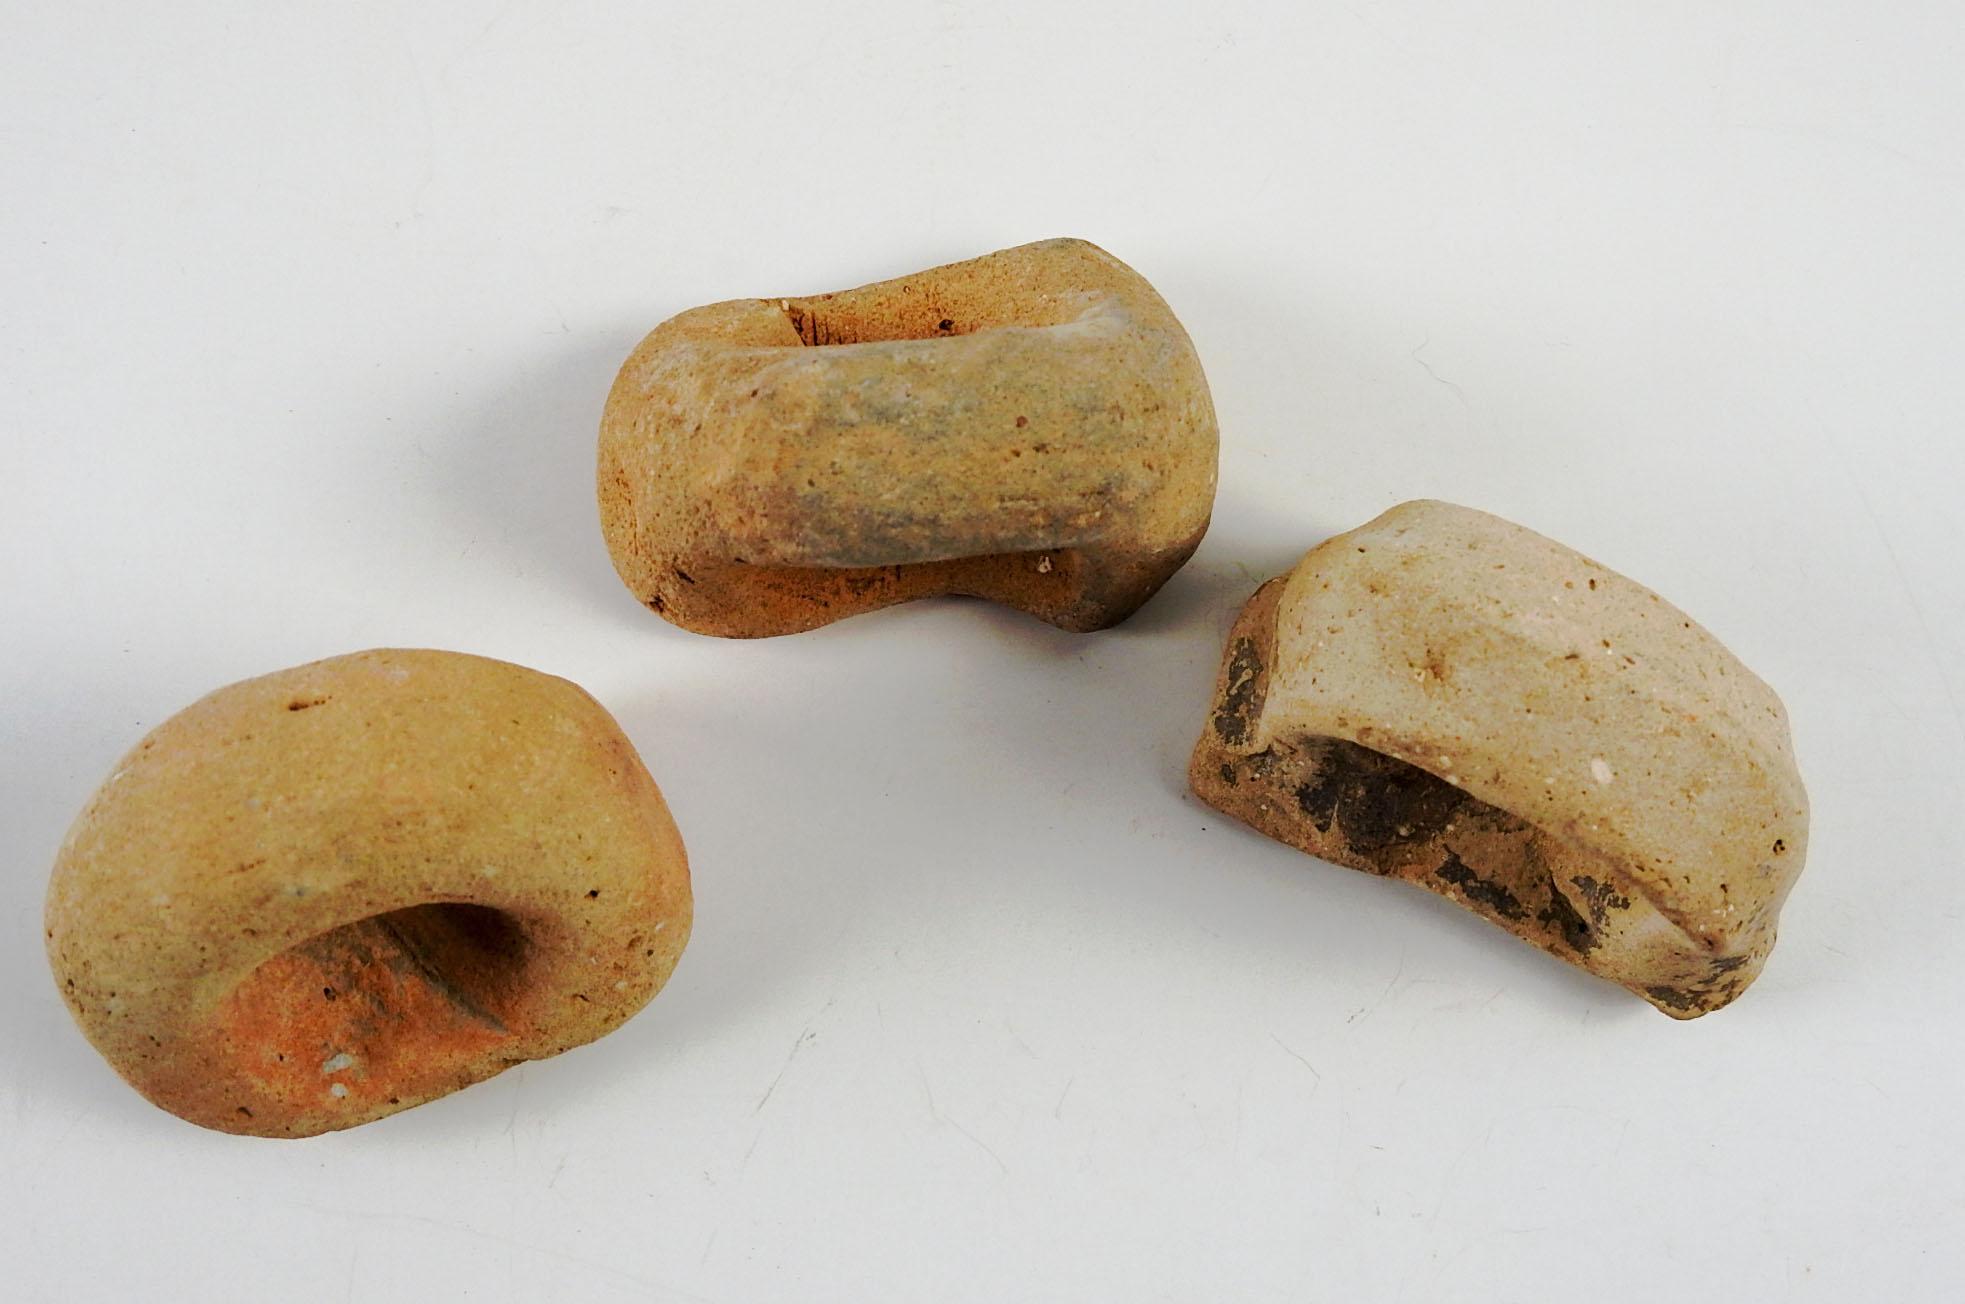 Group of 3 ancient Mediterranean terracotta pottery handle fragments . I have several sets of these, colors vary from brownish to reddish, size and overall wear will vary. Largest fragment is about 2